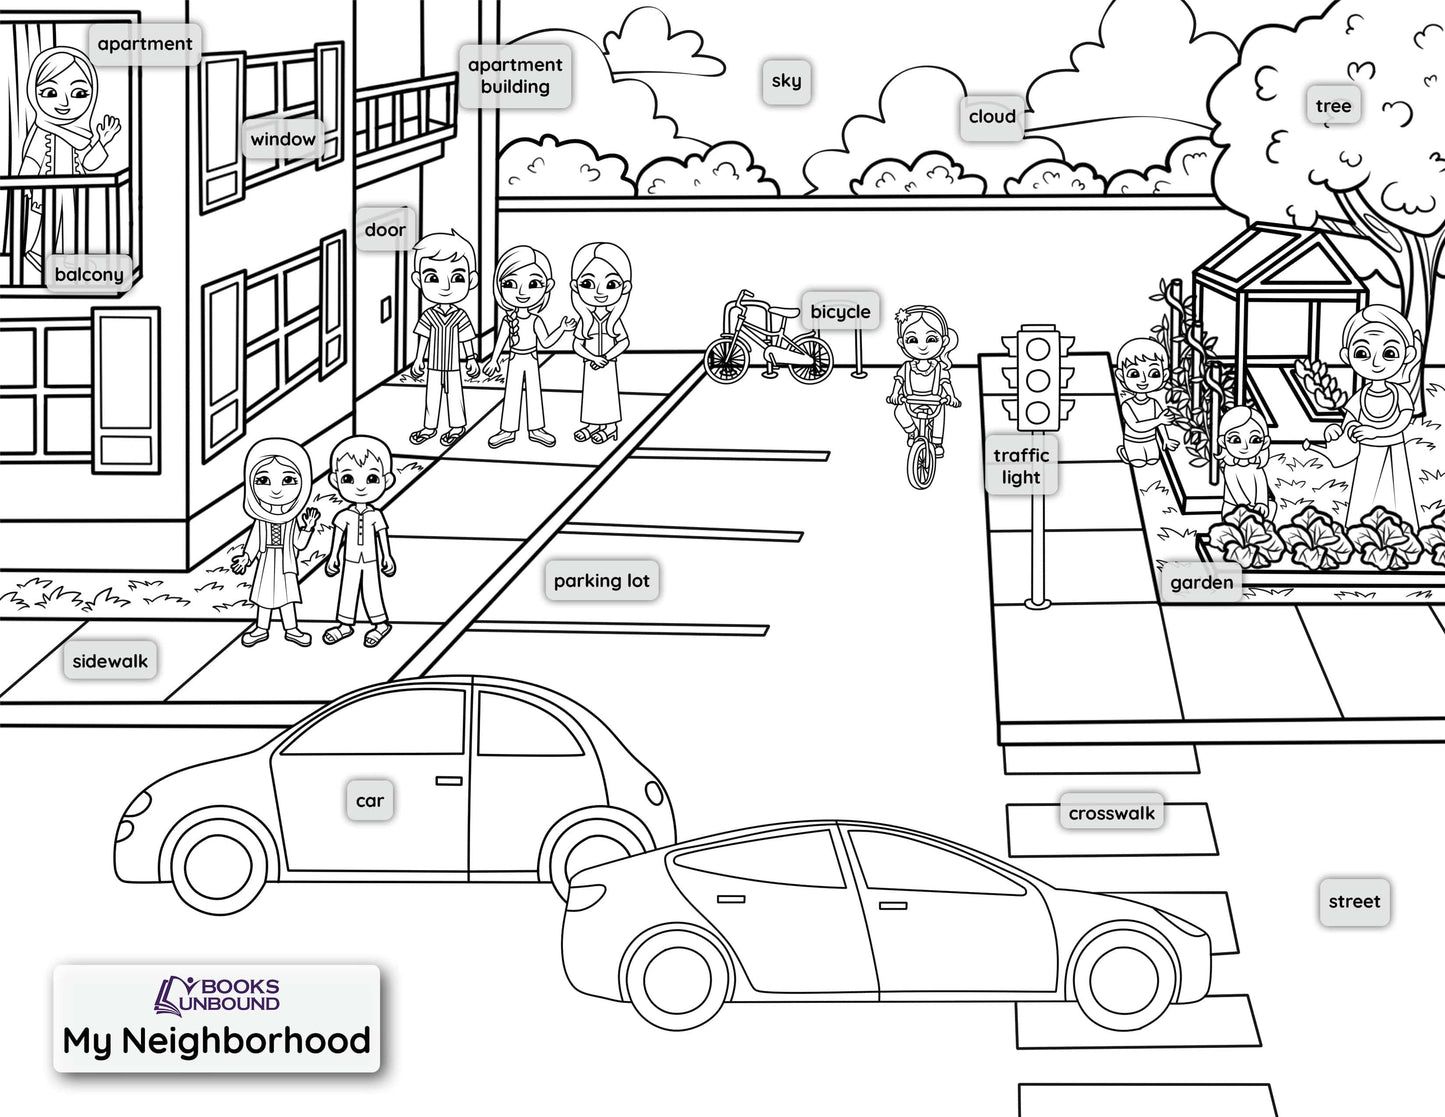 Coloring page version of Books Unbound's "My Neighborhood" scene to build vocabulary and start conversation.